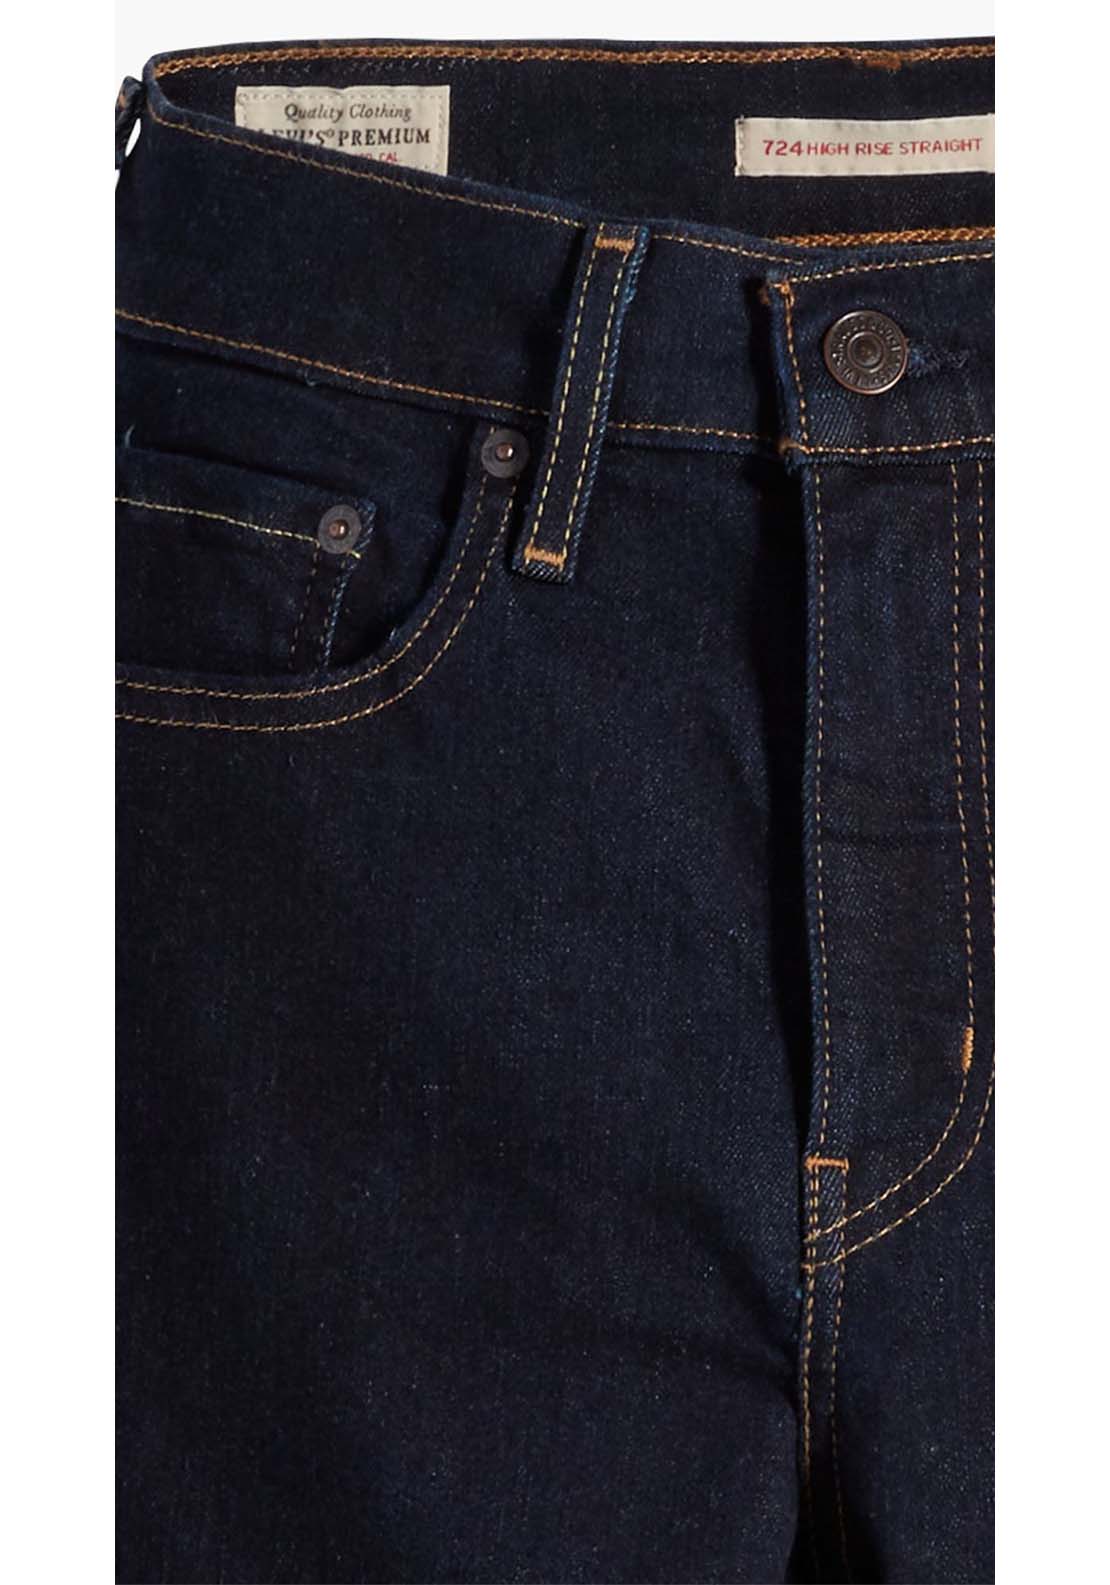 Levis 724 High Rise Straight Jean 6 Shaws Department Stores